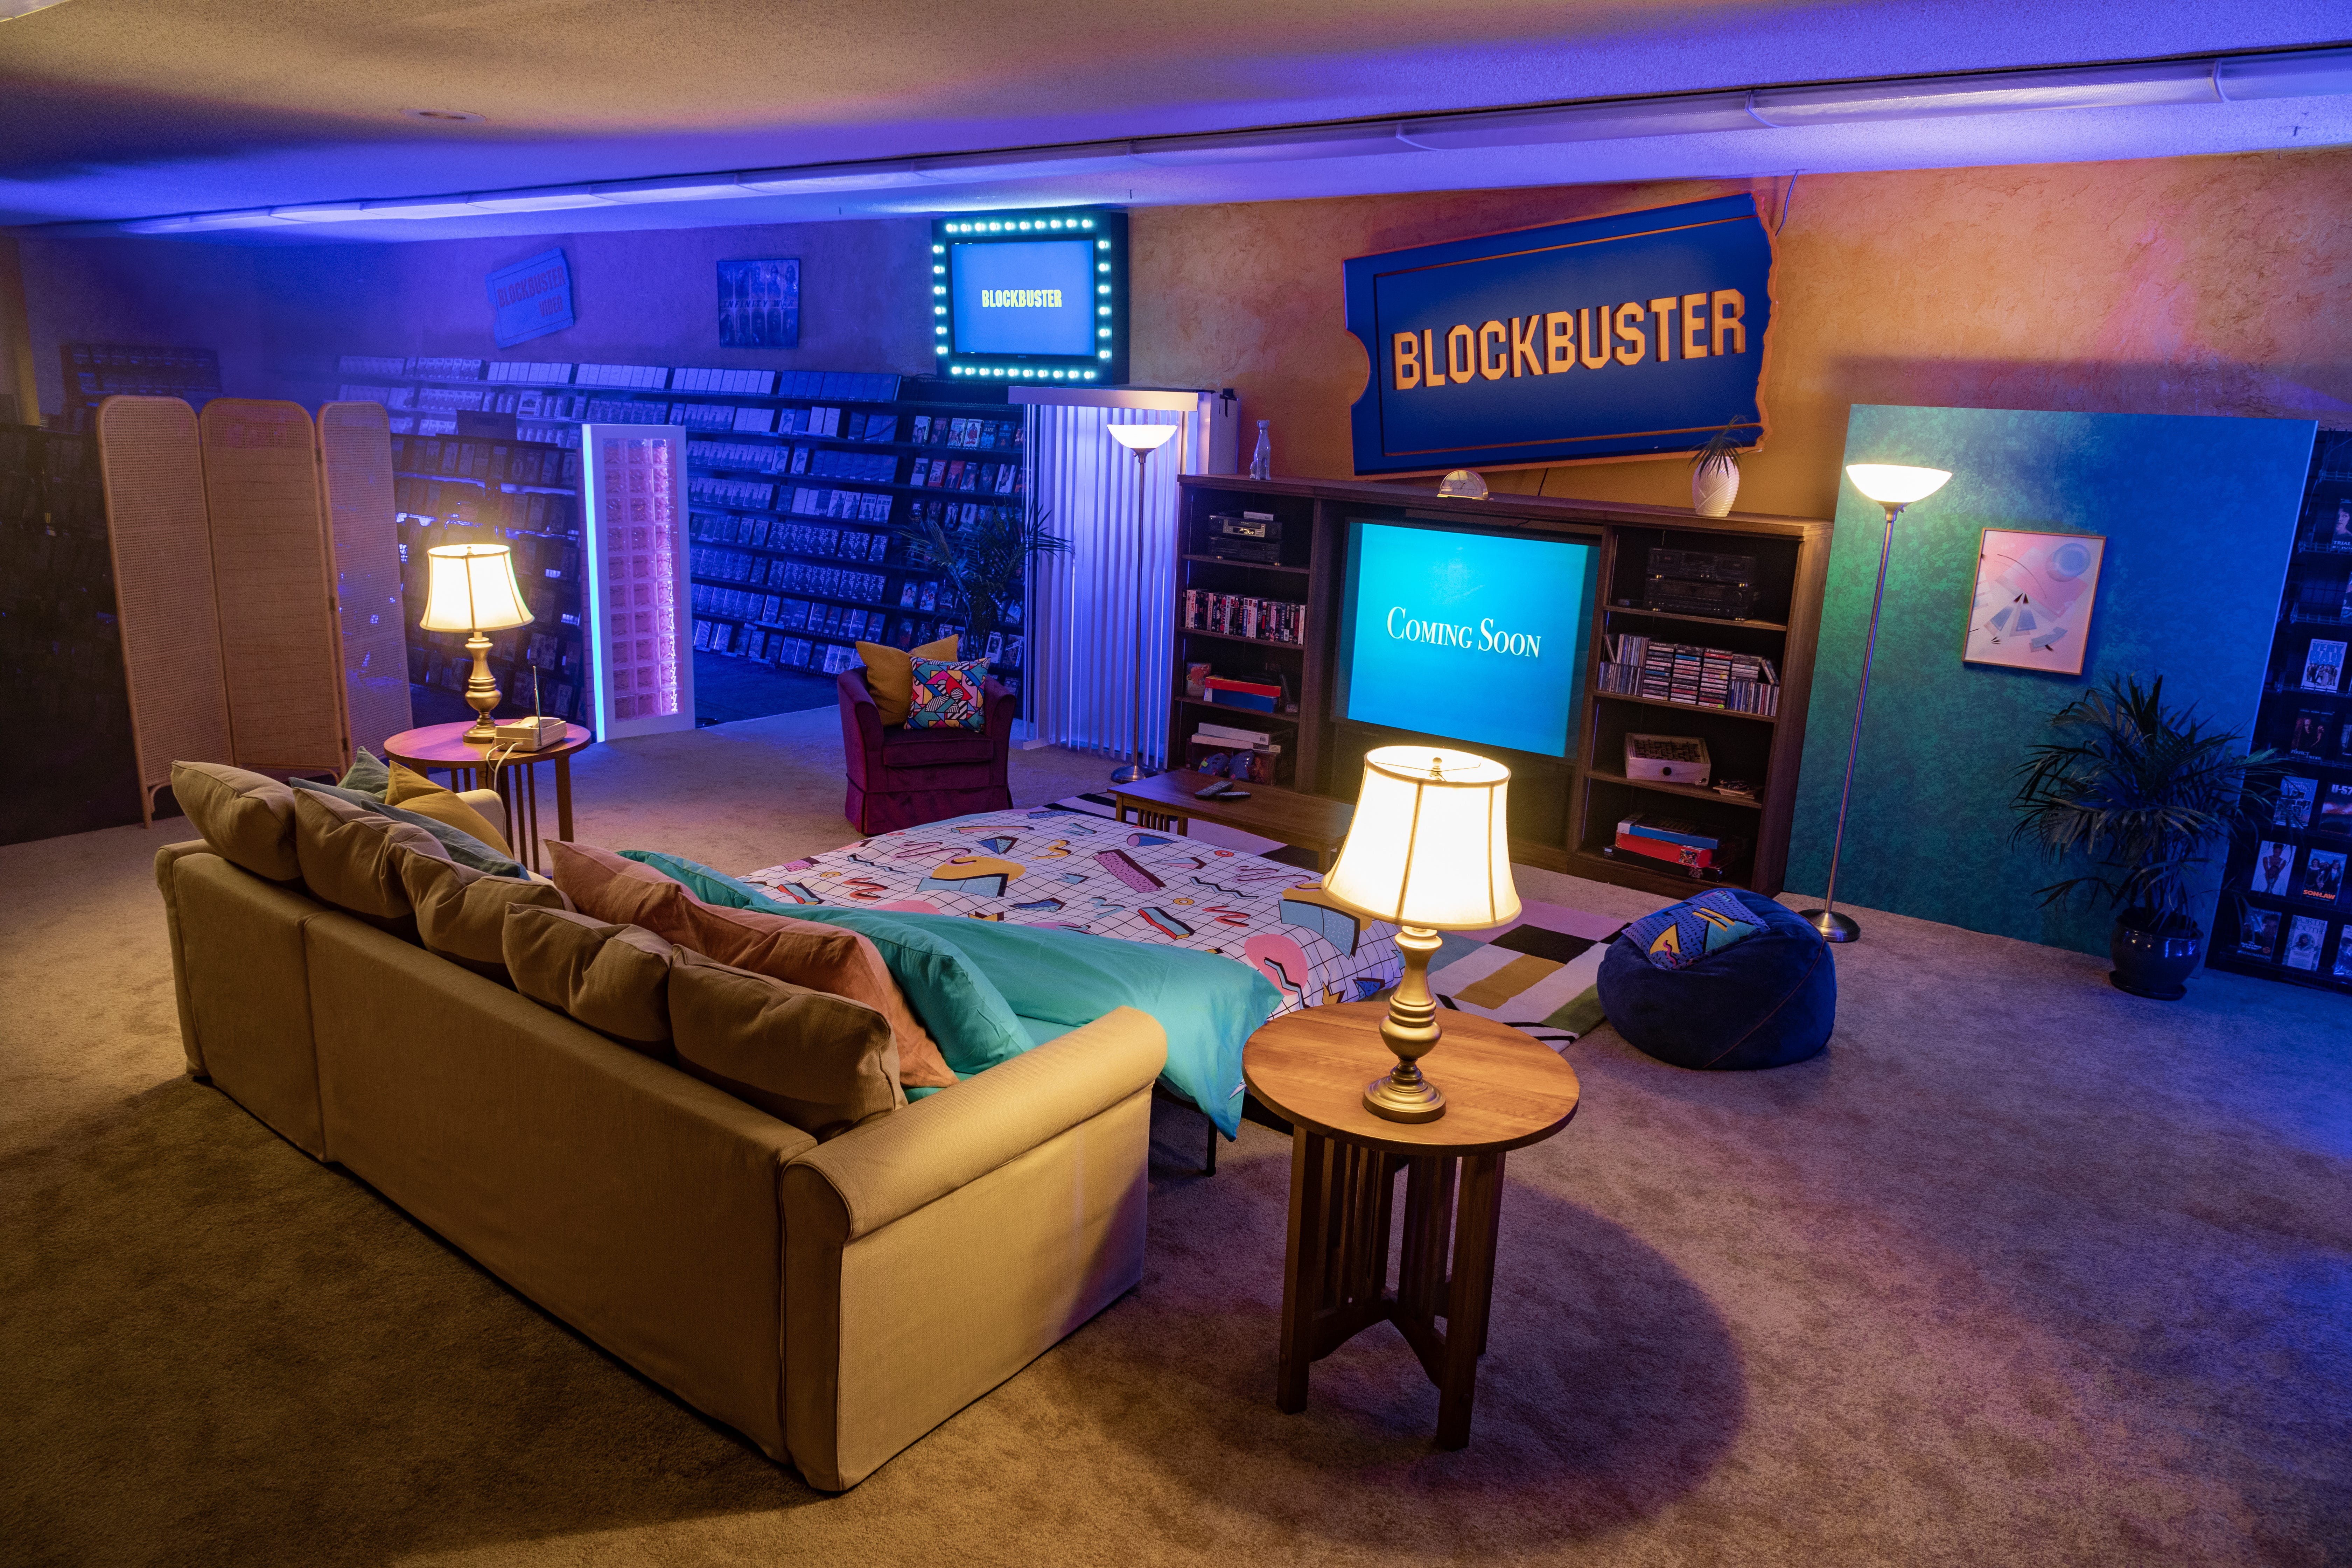 Overvind glans Mathis Airbnb: World's last Blockbuster store is transforming into an Airbnb